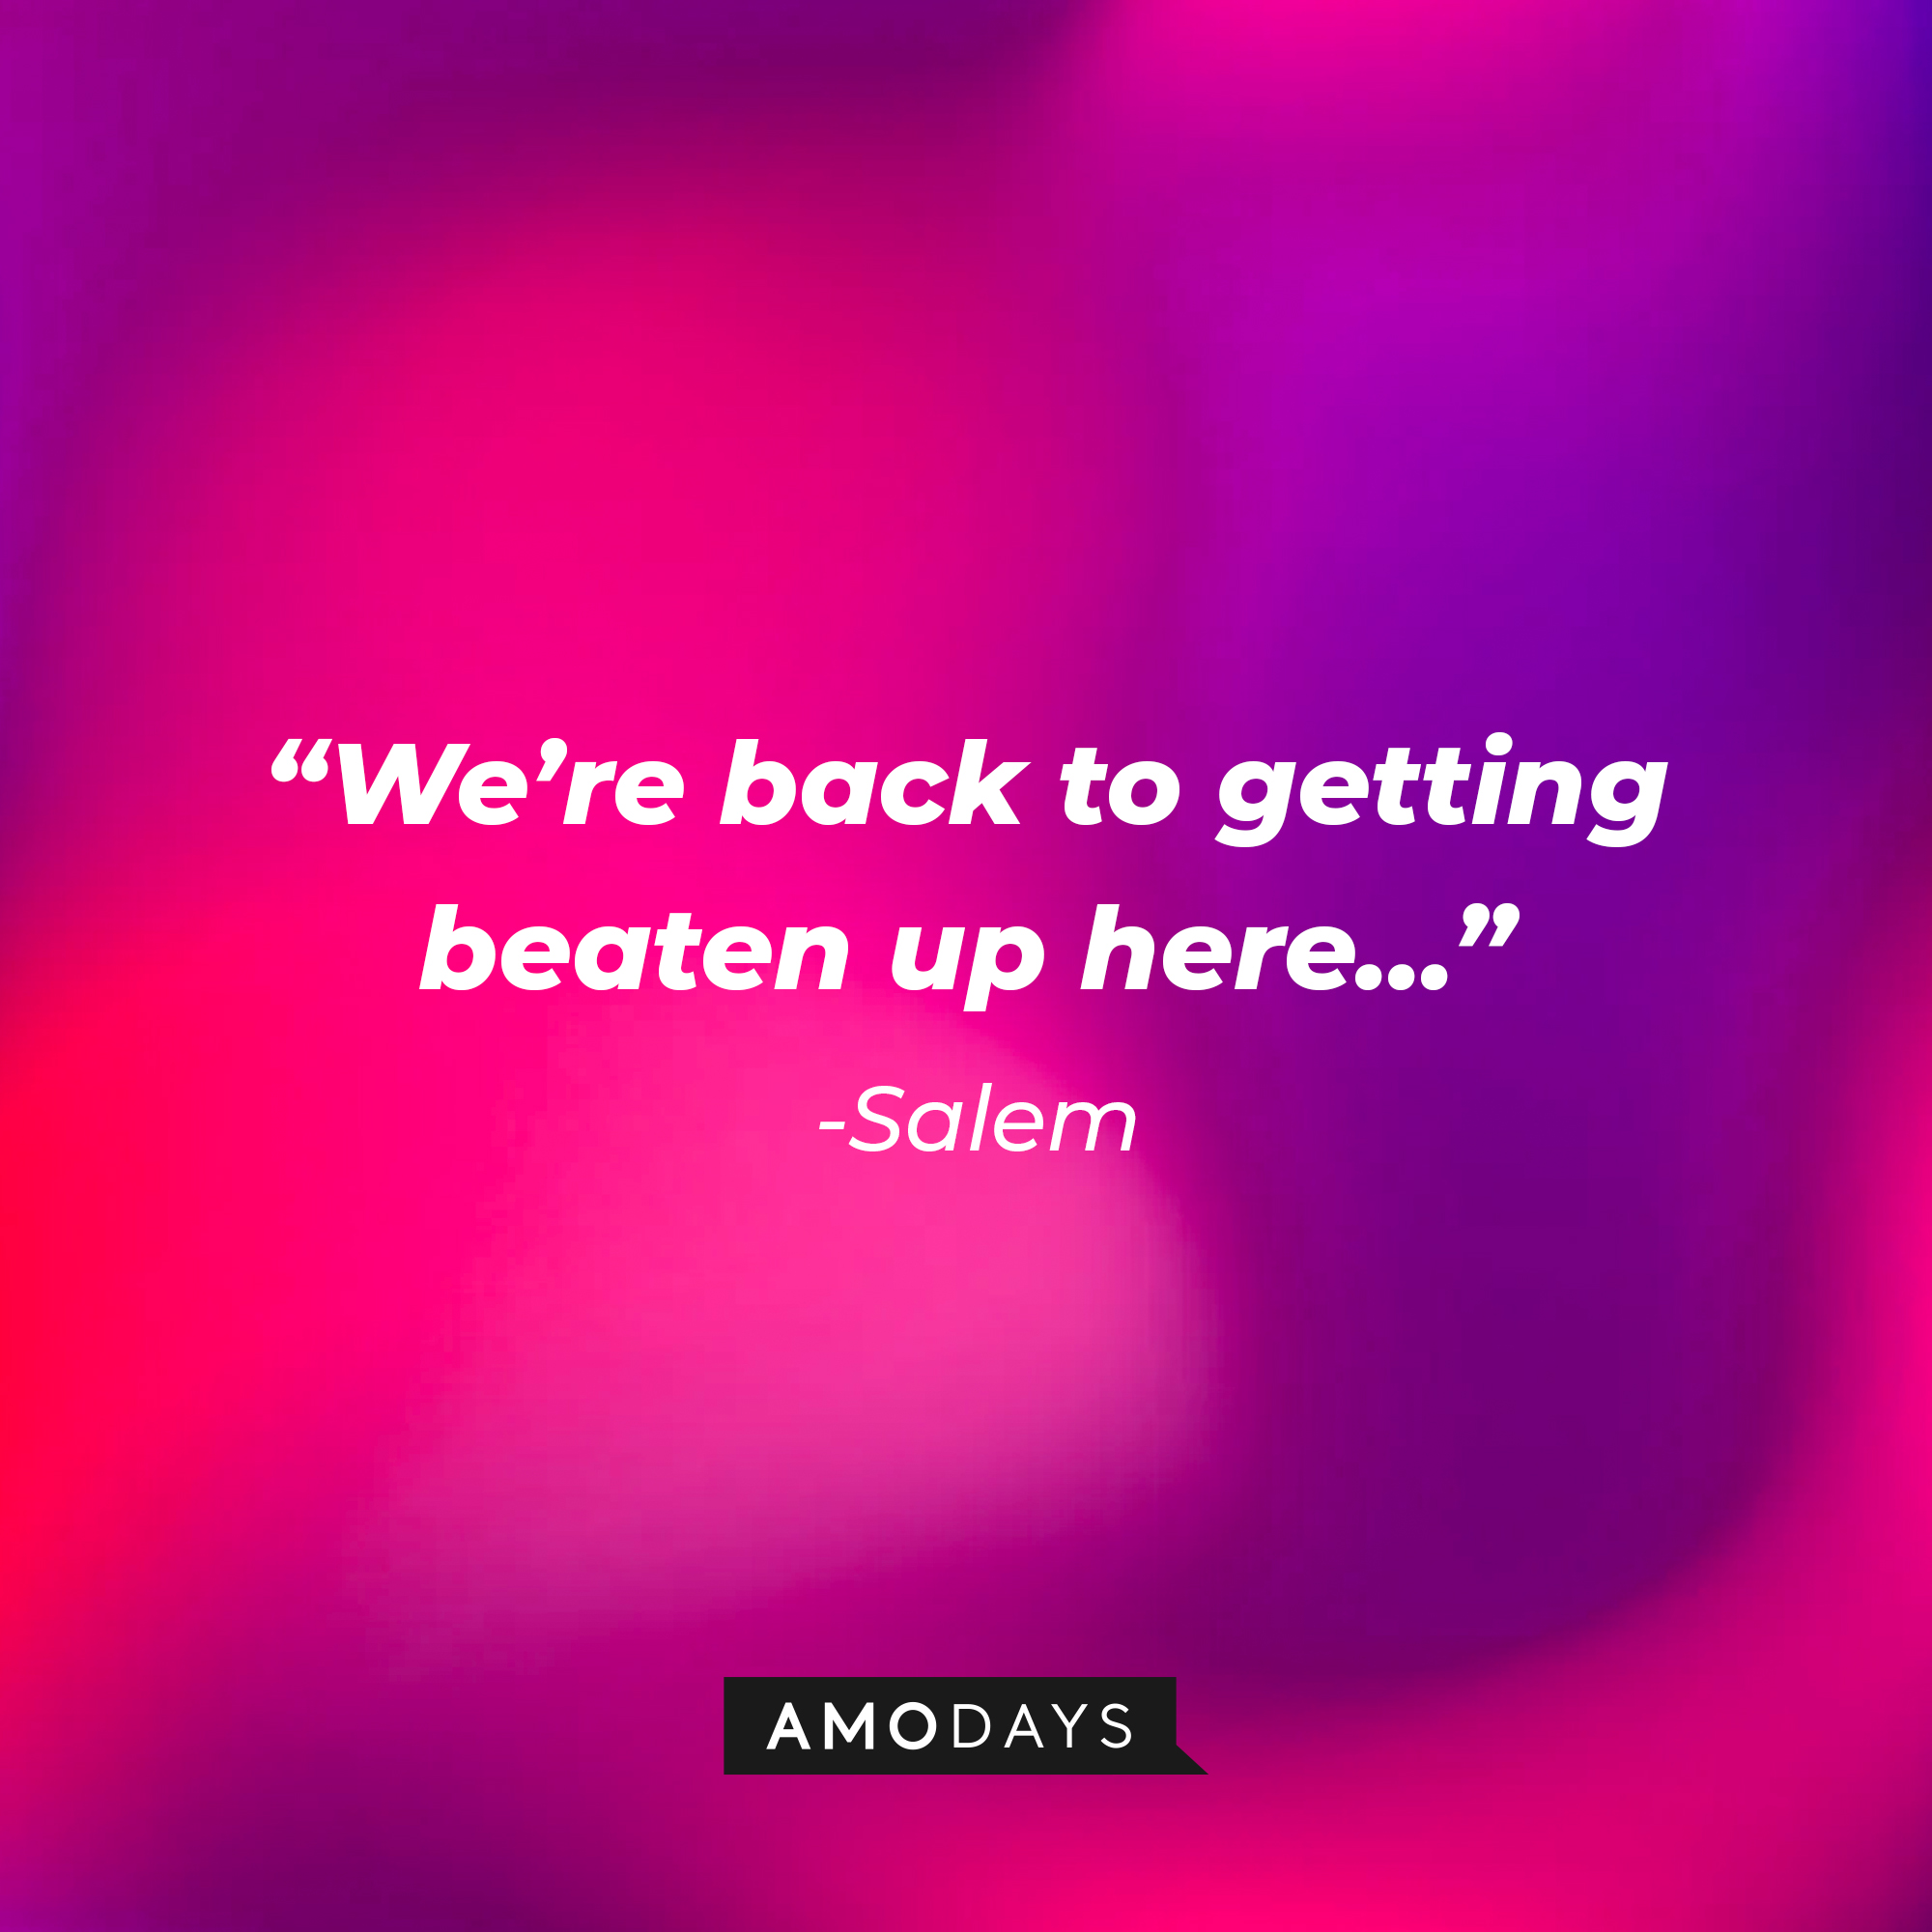 Salem’s quote: “We’re back to getting beaten up here...”  | Source: AmoDays